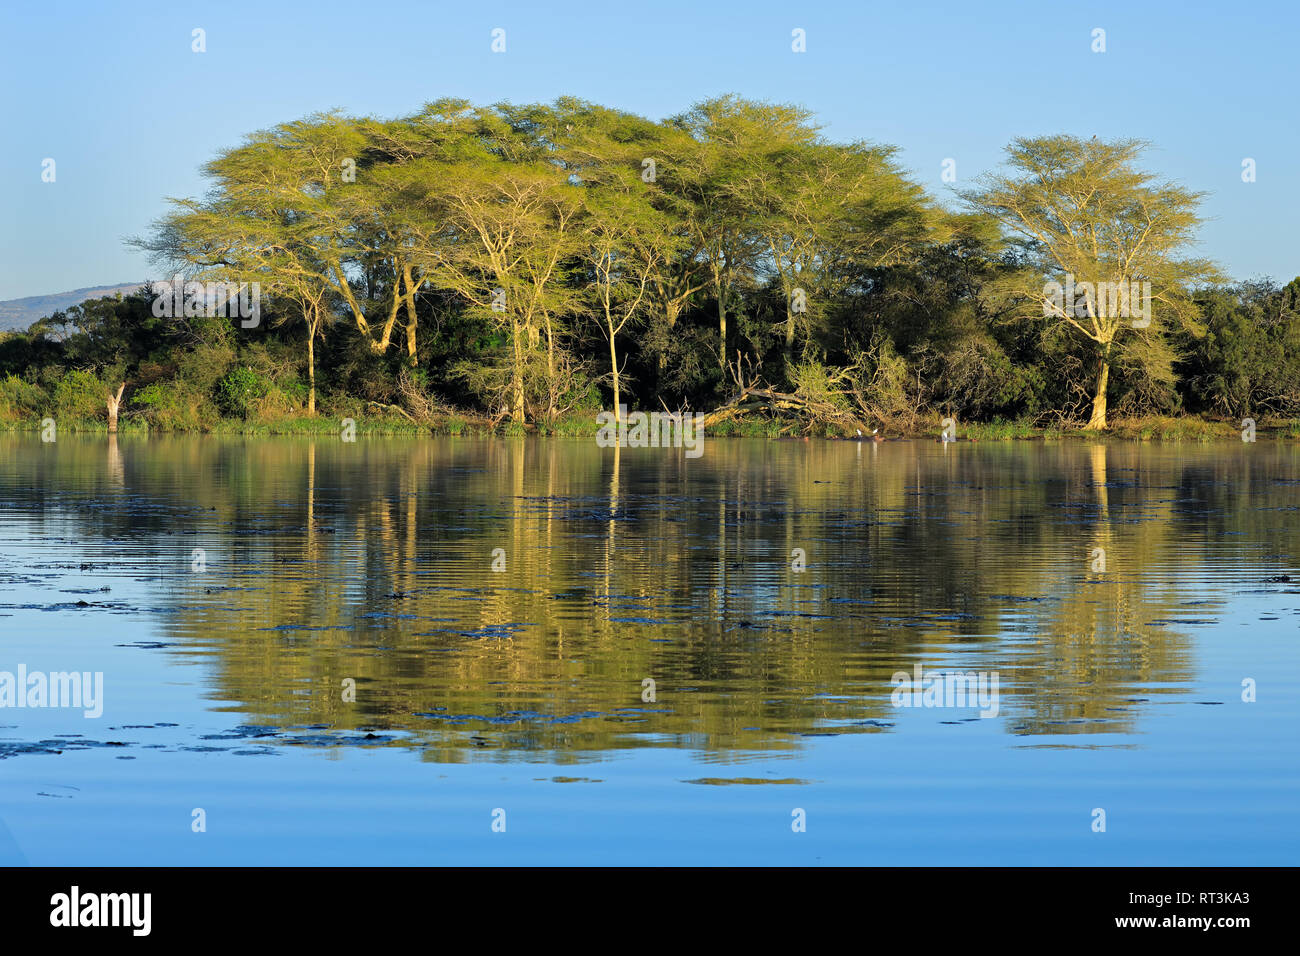 Distinctive fever trees (Vachellia xanthoploea) growing on the edge of a lake, Mkuze game reserve, South Africa Stock Photo